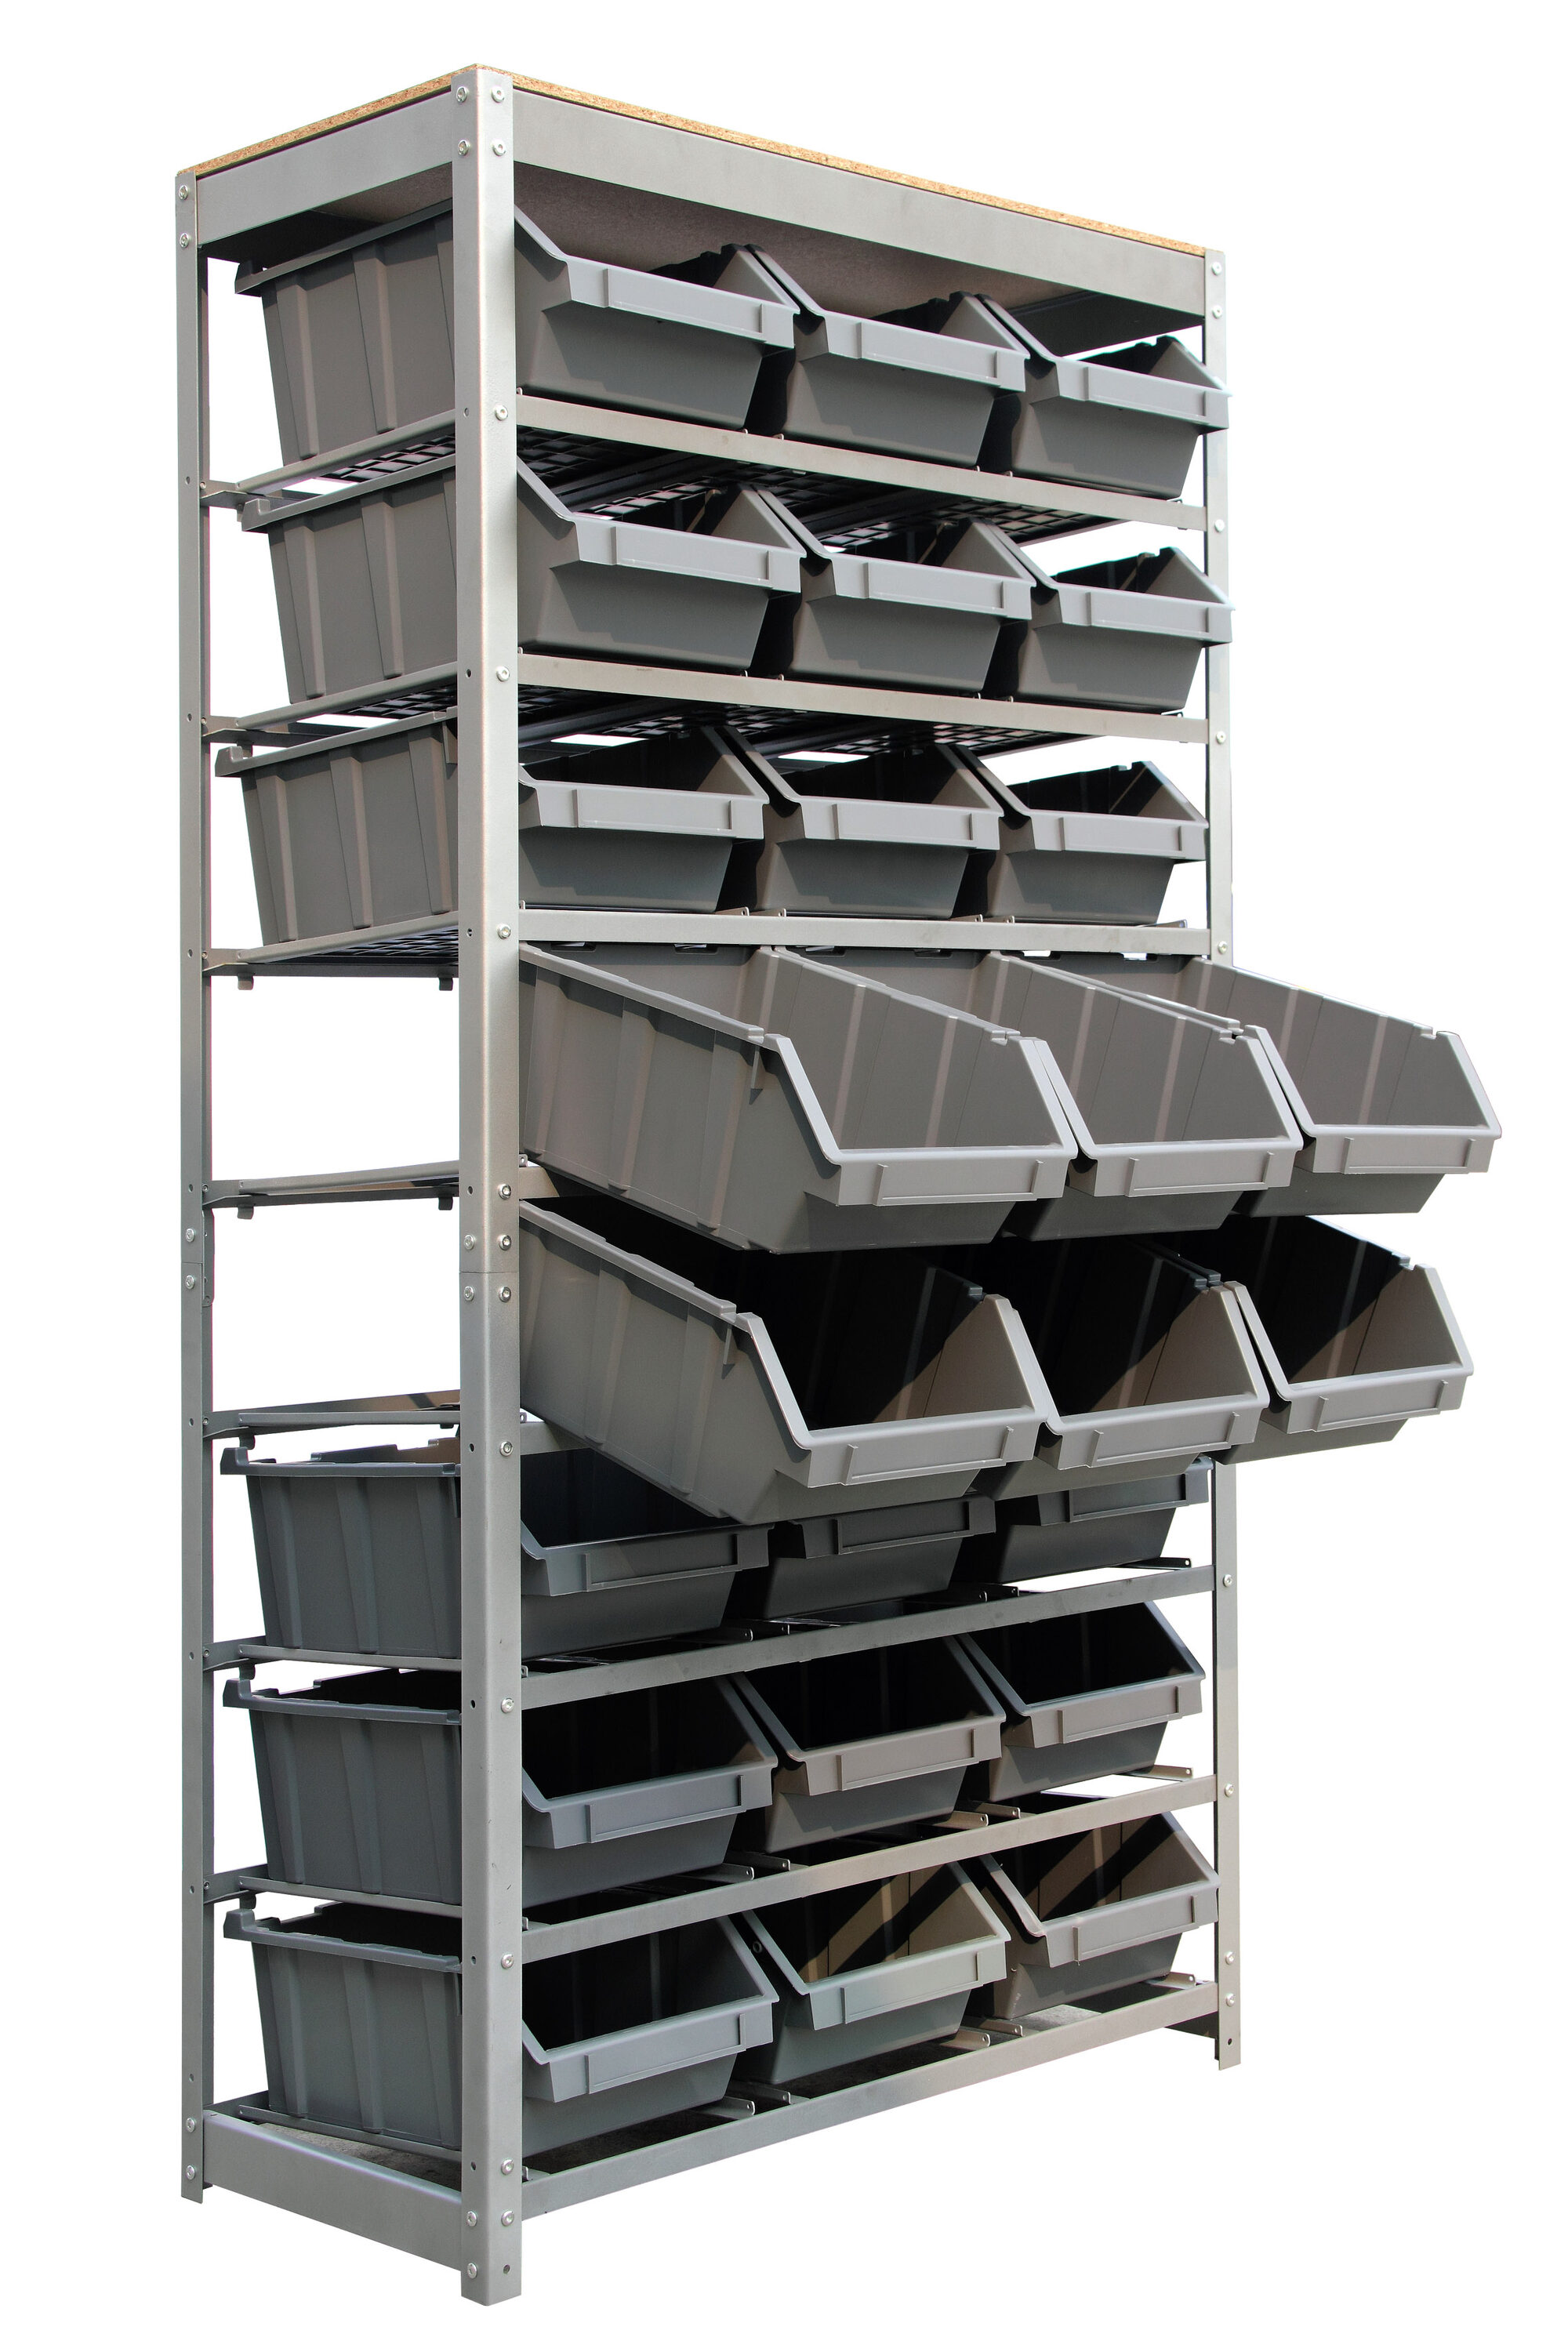 8 Bin Storage Rack Organizer- Wall Mountable Garage Shelving With  Removeable Bins For Tools, Hardware, Crafts By Fleming Supply : Target